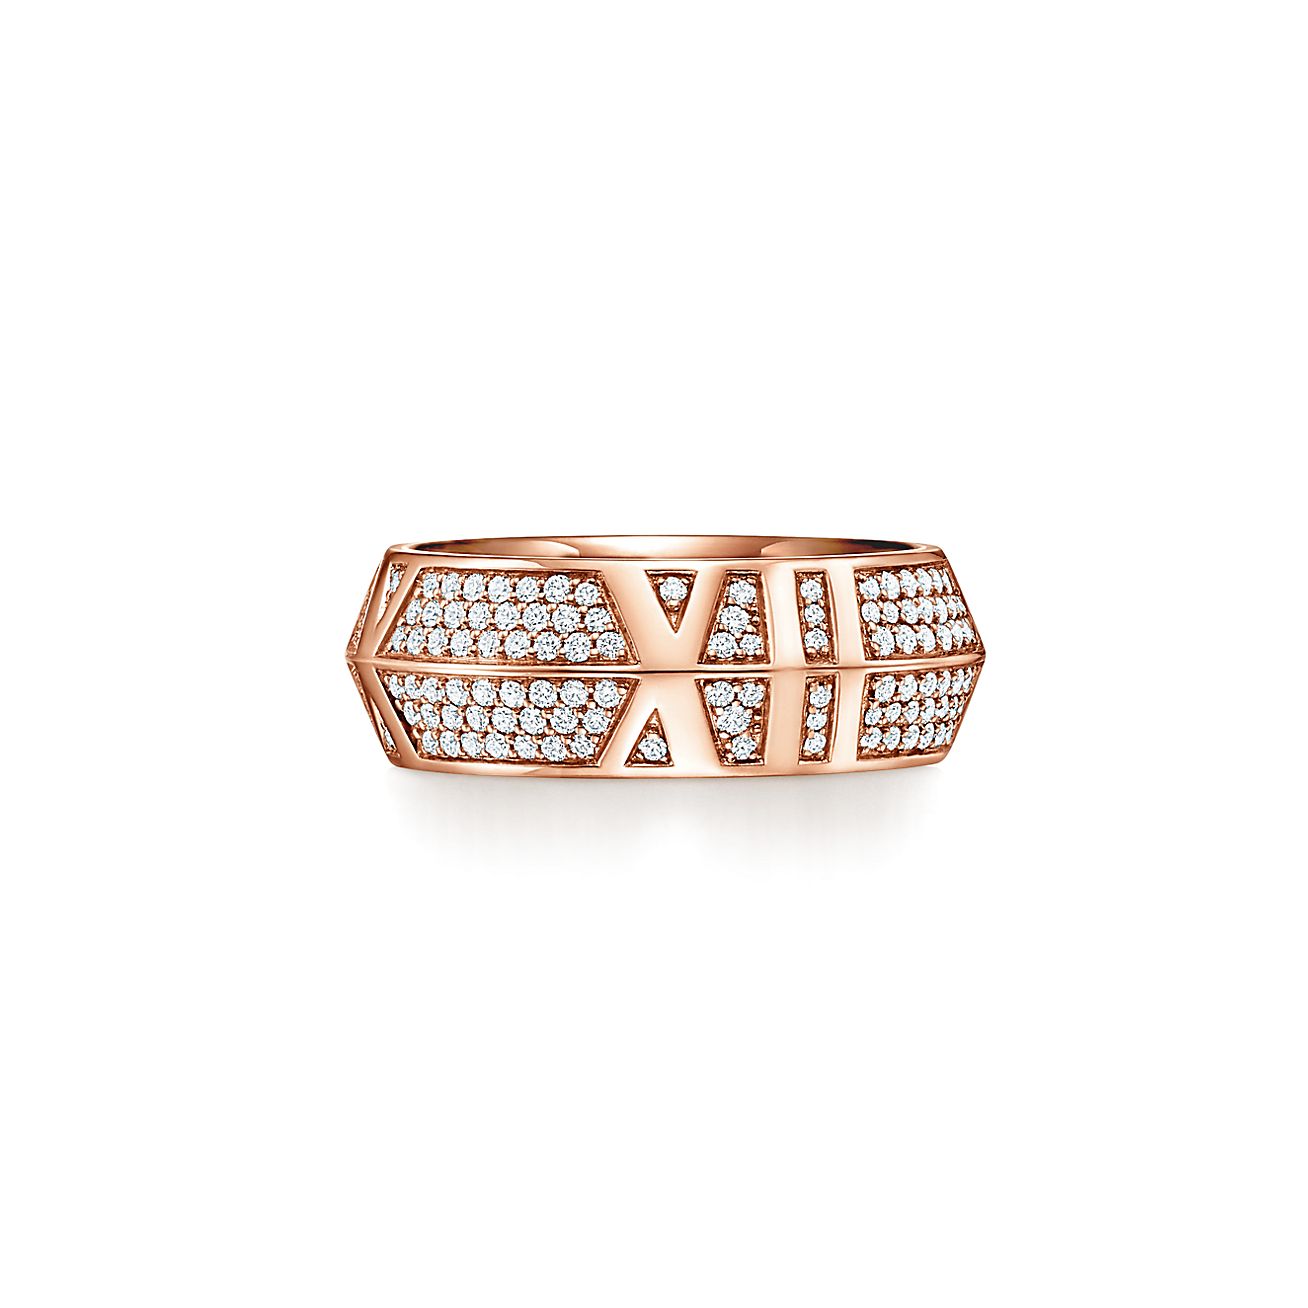 Atlas® X Closed Wide Ring in Rose Gold with Pavé Diamonds, 7.5 mm Wide |  Tiffany & Co.